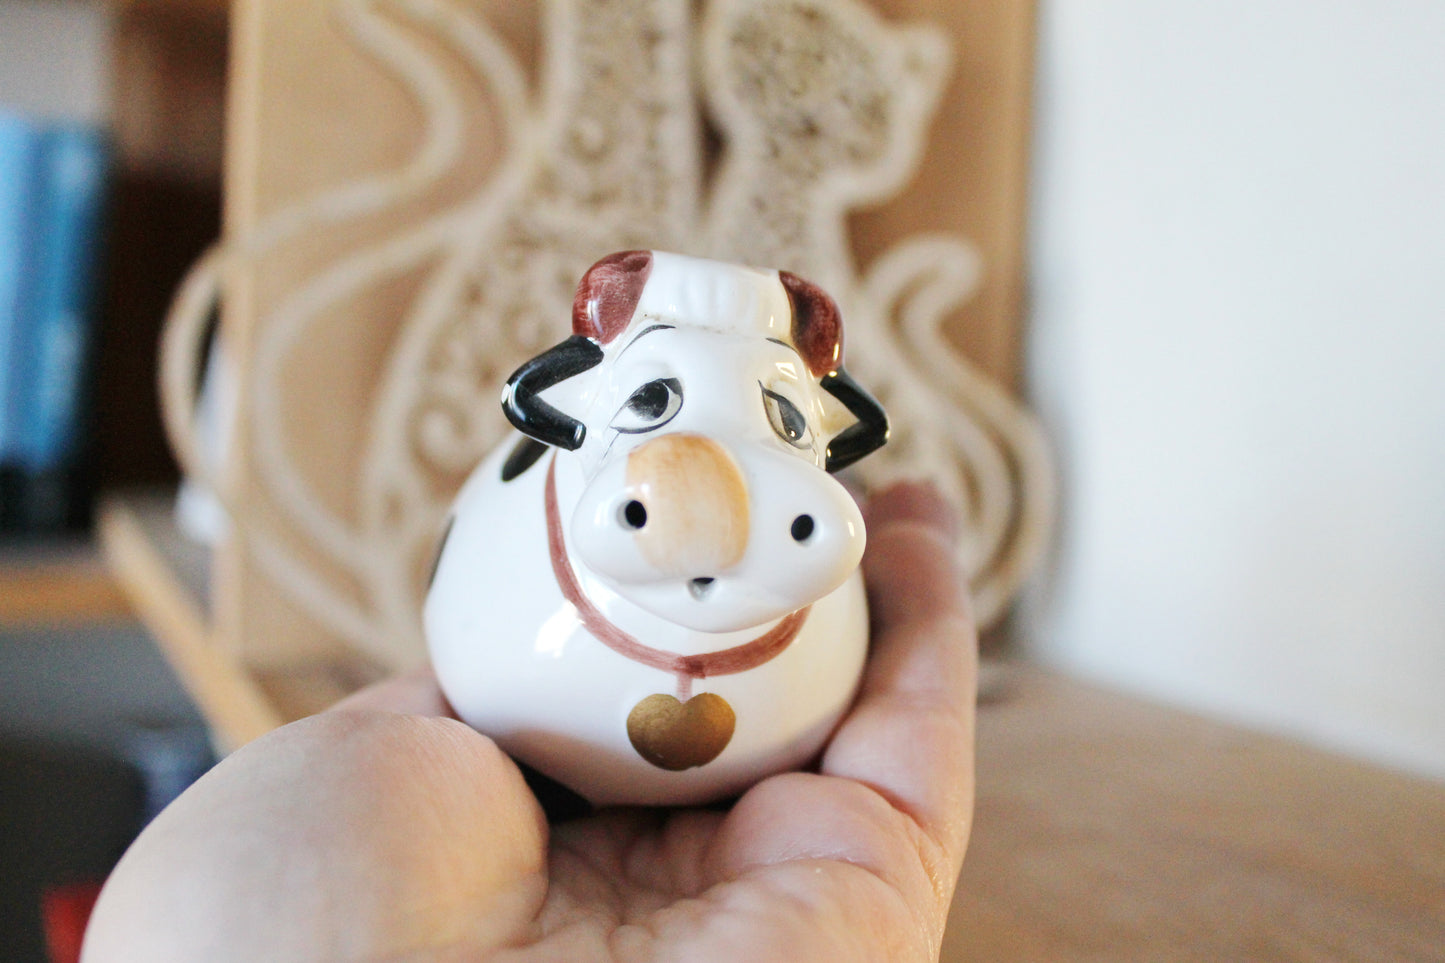 Vintage cute ceramic salt/pepper shaker - Small Cow - 3.5 inches - 1980s